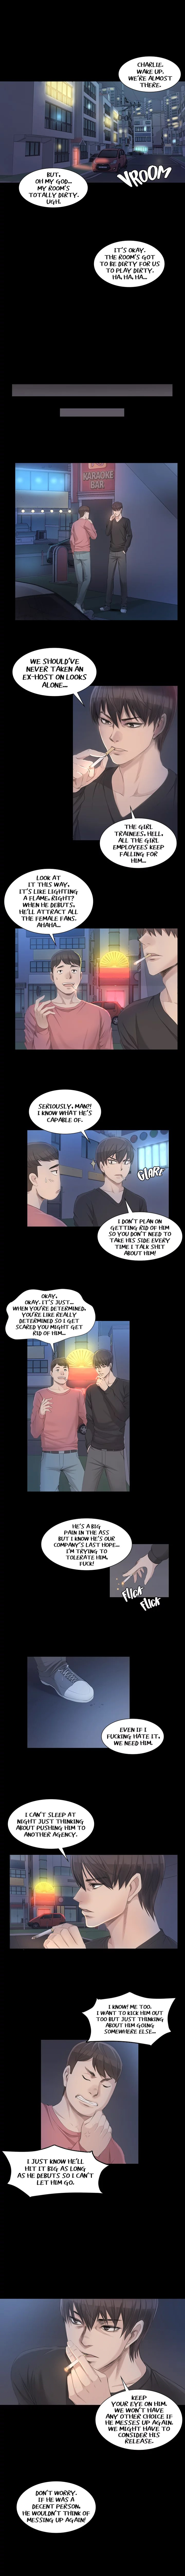 Producer - Chapter 4 Page 2